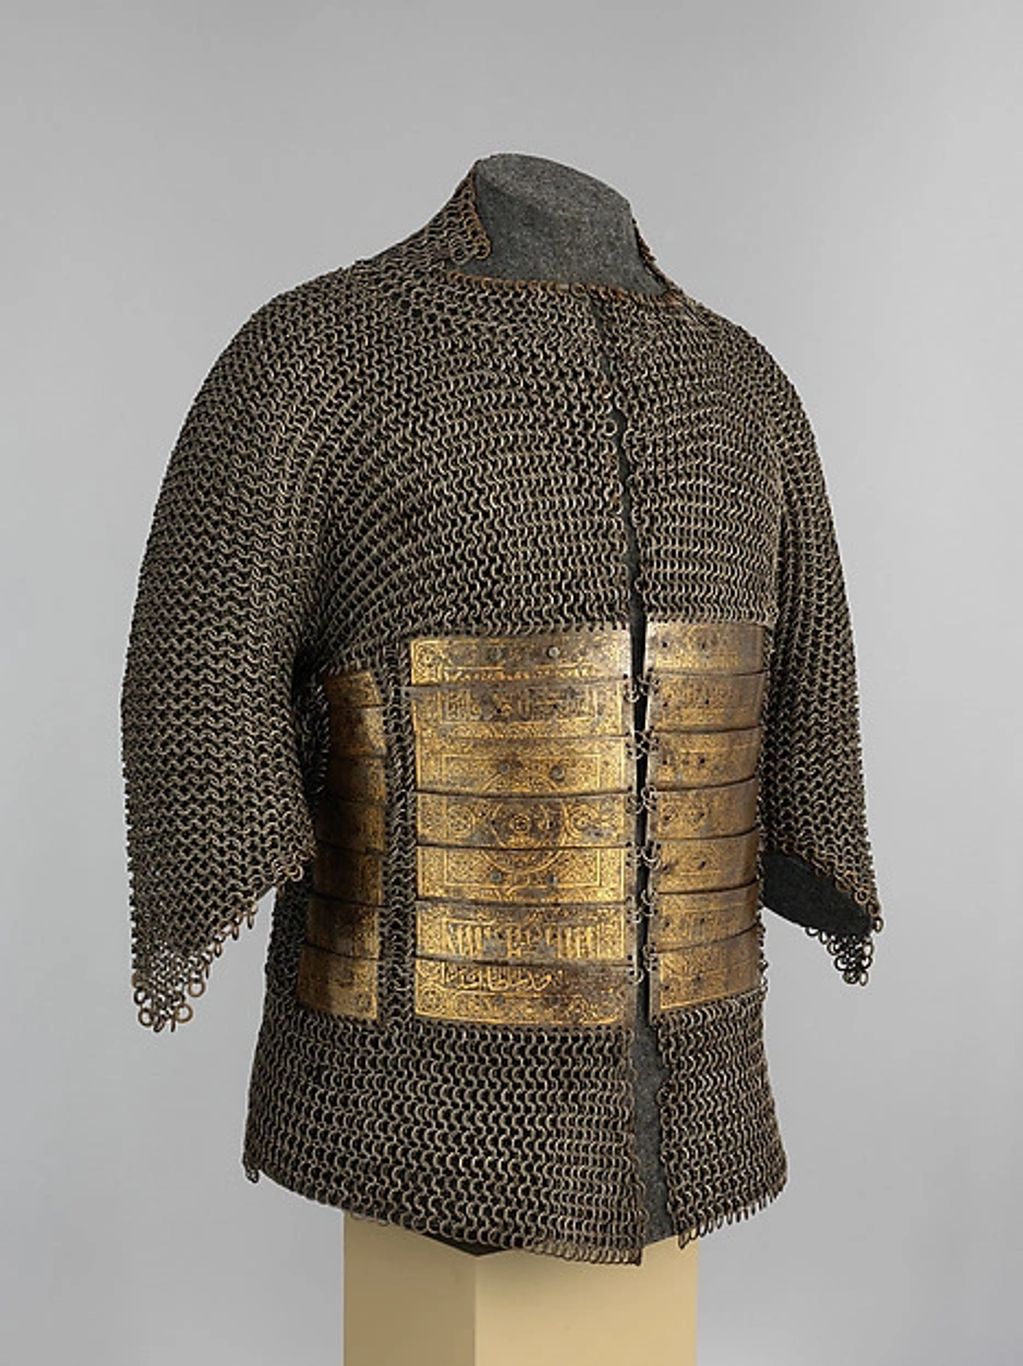 Chainmaille goes back to the Middle Ages. Image of chainmaille shirt.